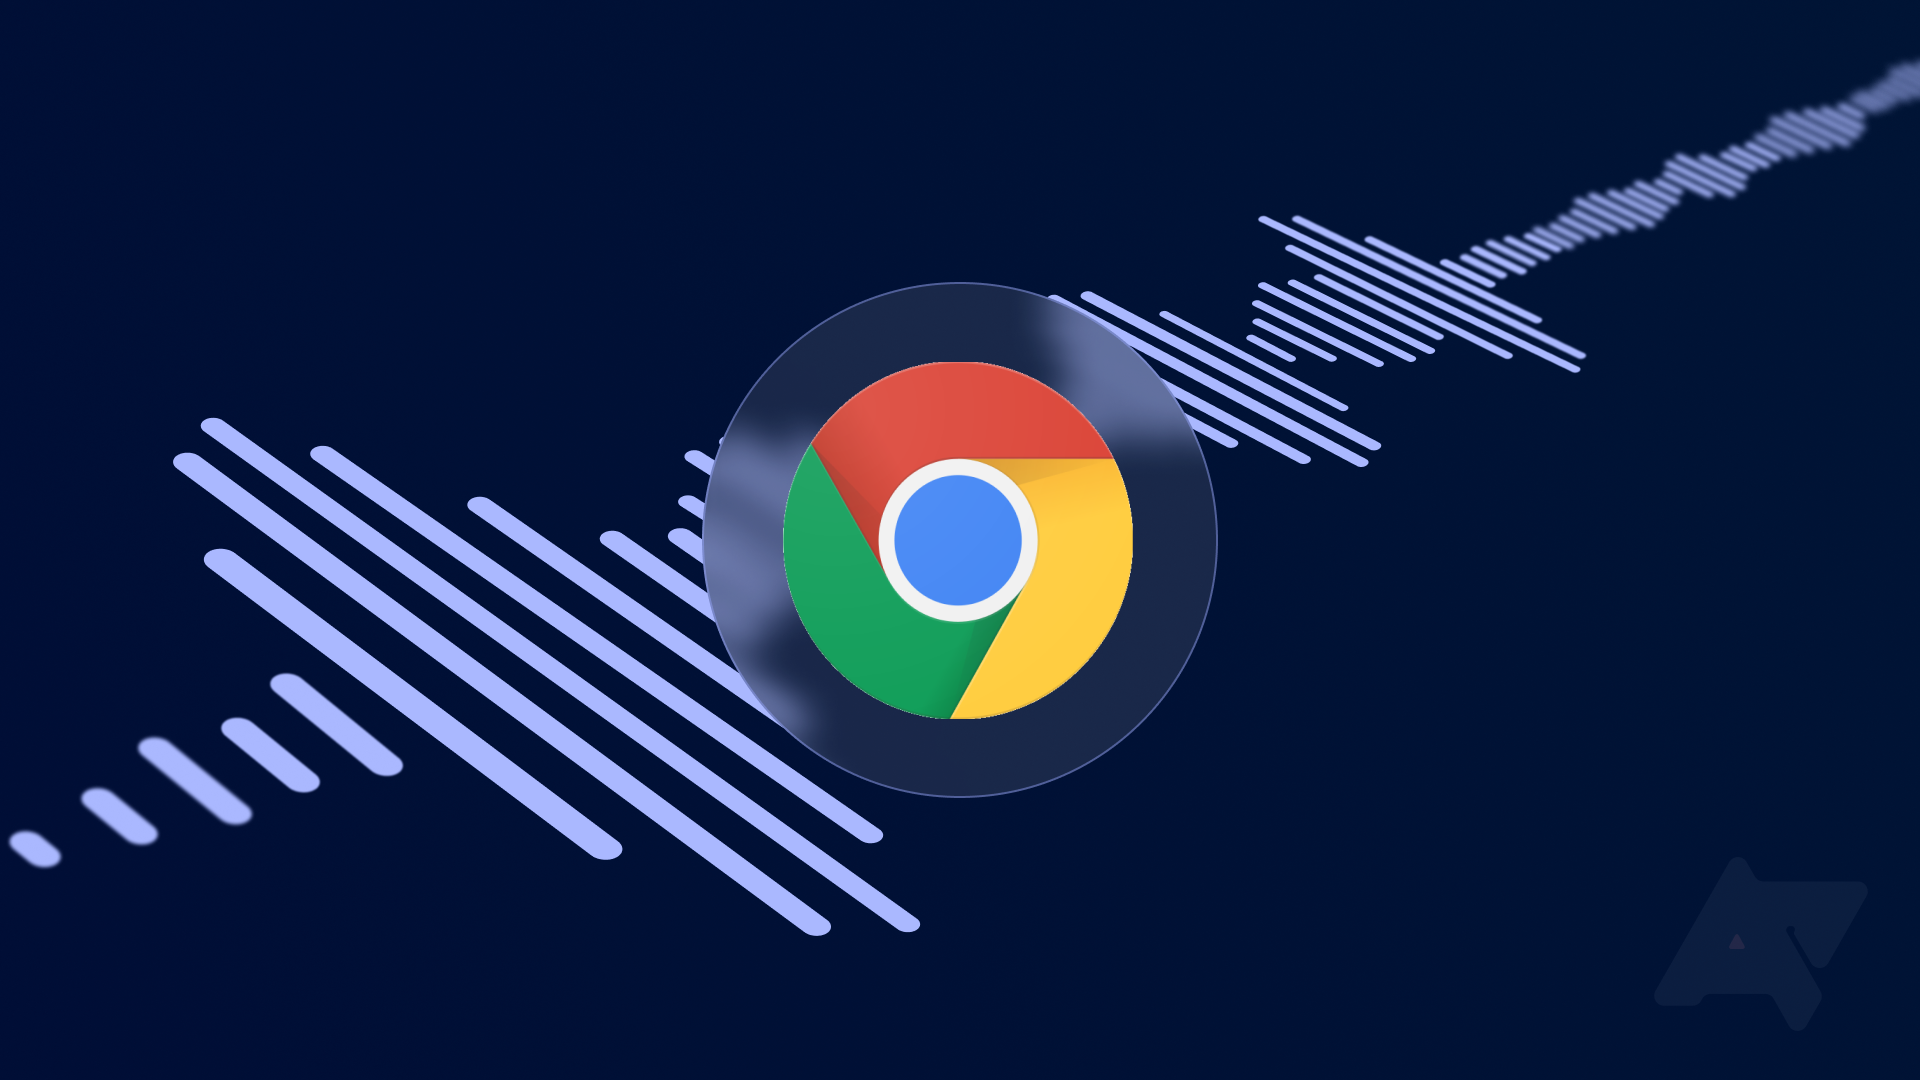 Illustration of the Chrome icon with a glass-like outline around it over a blue soundwave